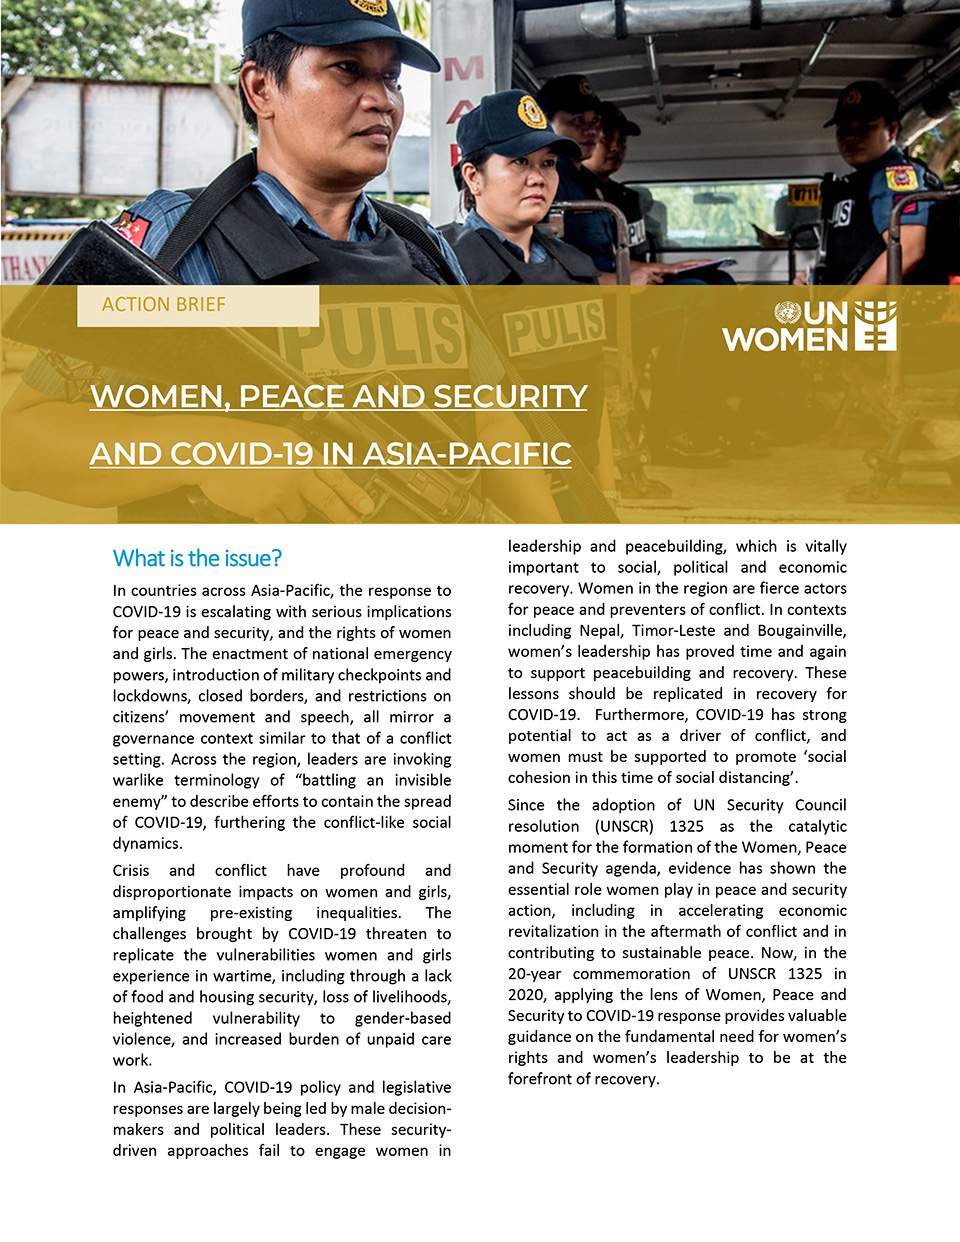  WOMEN, PEACE AND SECURITY AND COVID-19 IN ASIA-PACIFIC